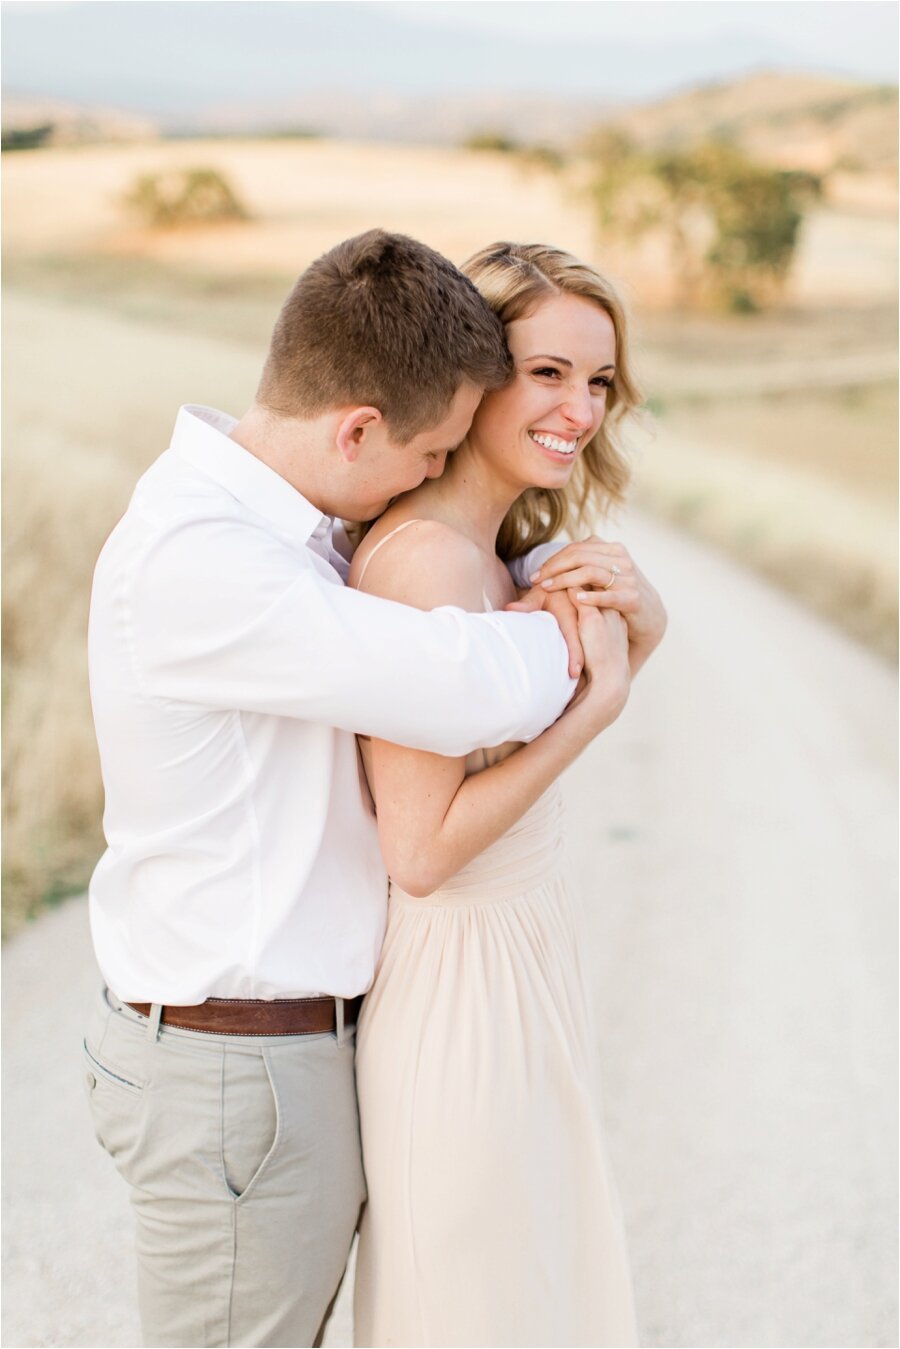 Engagement Session poses